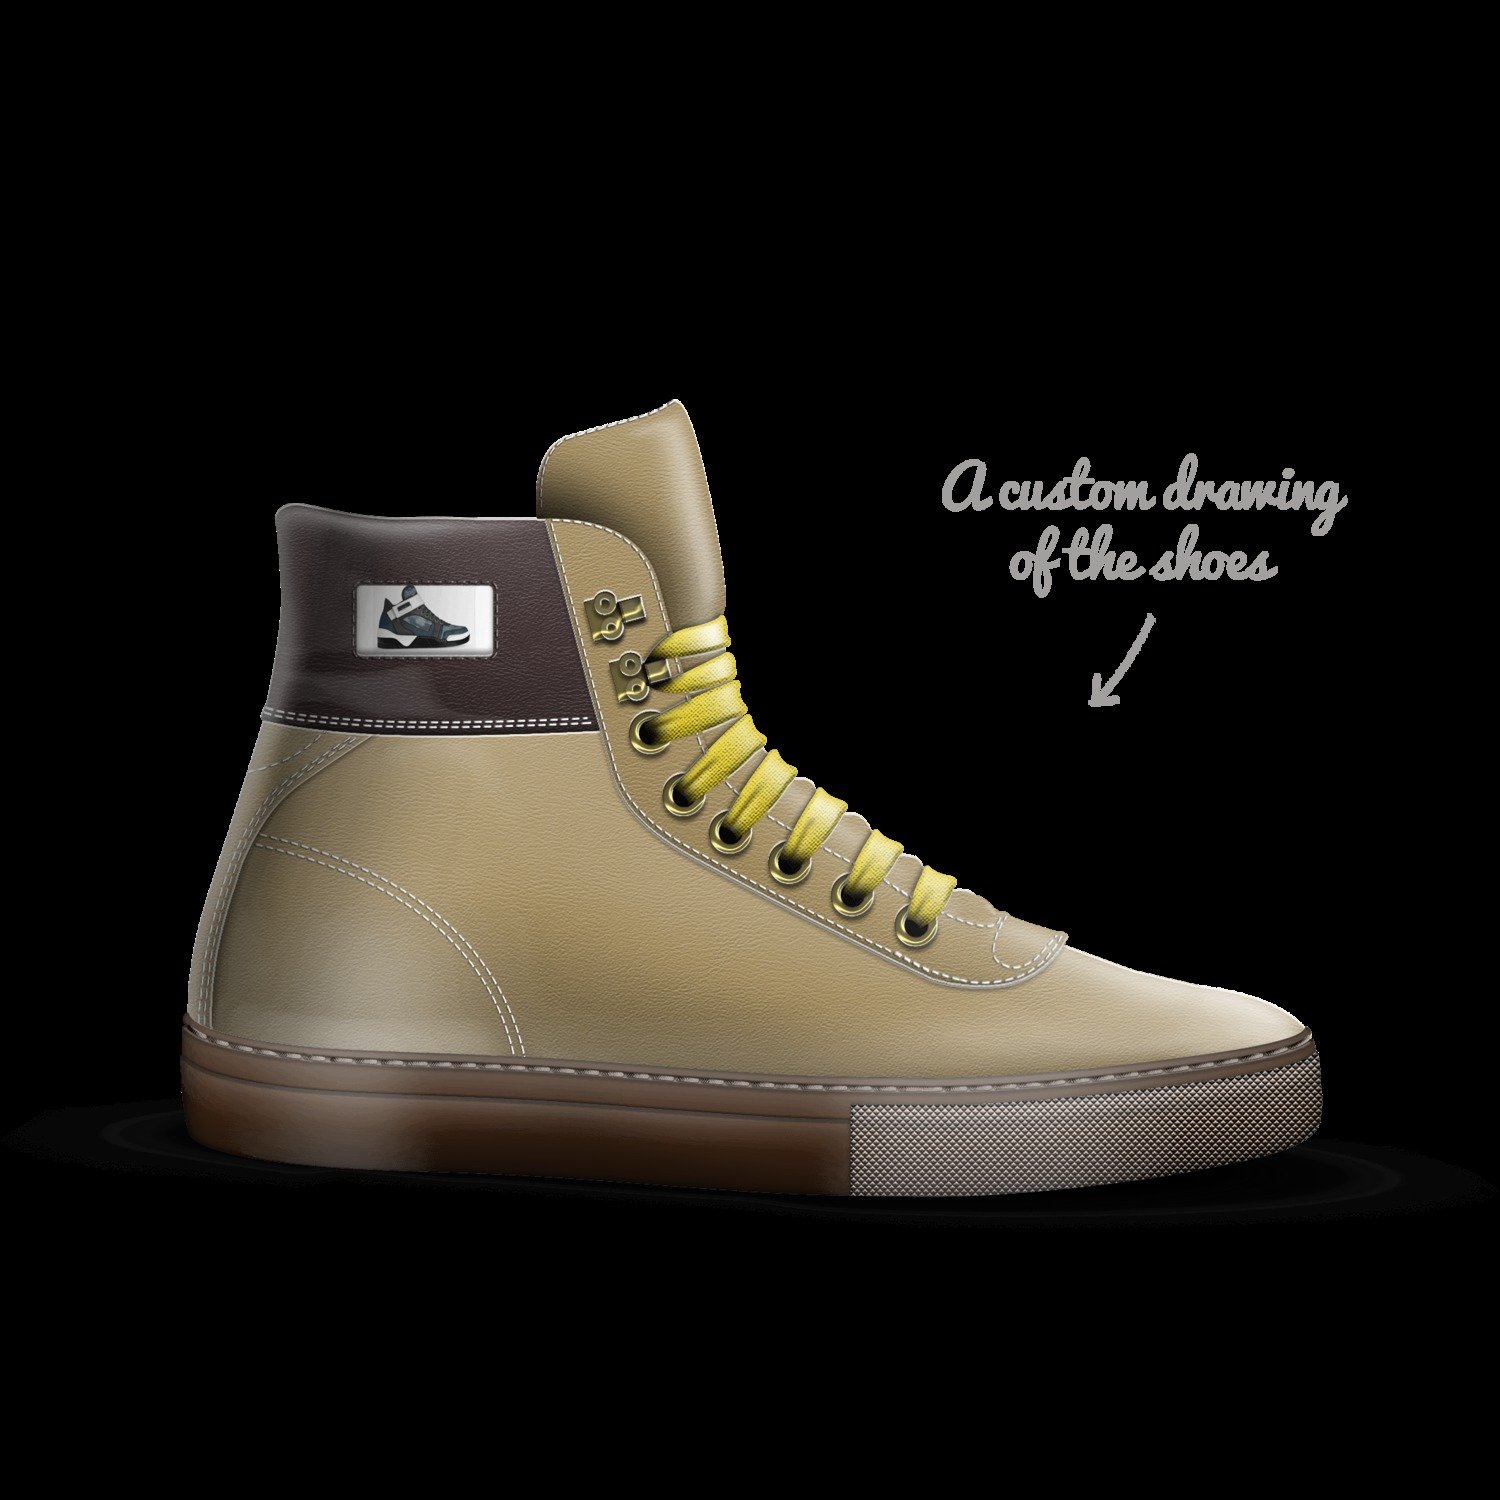 A Custom Shoe concept by Mad Rool